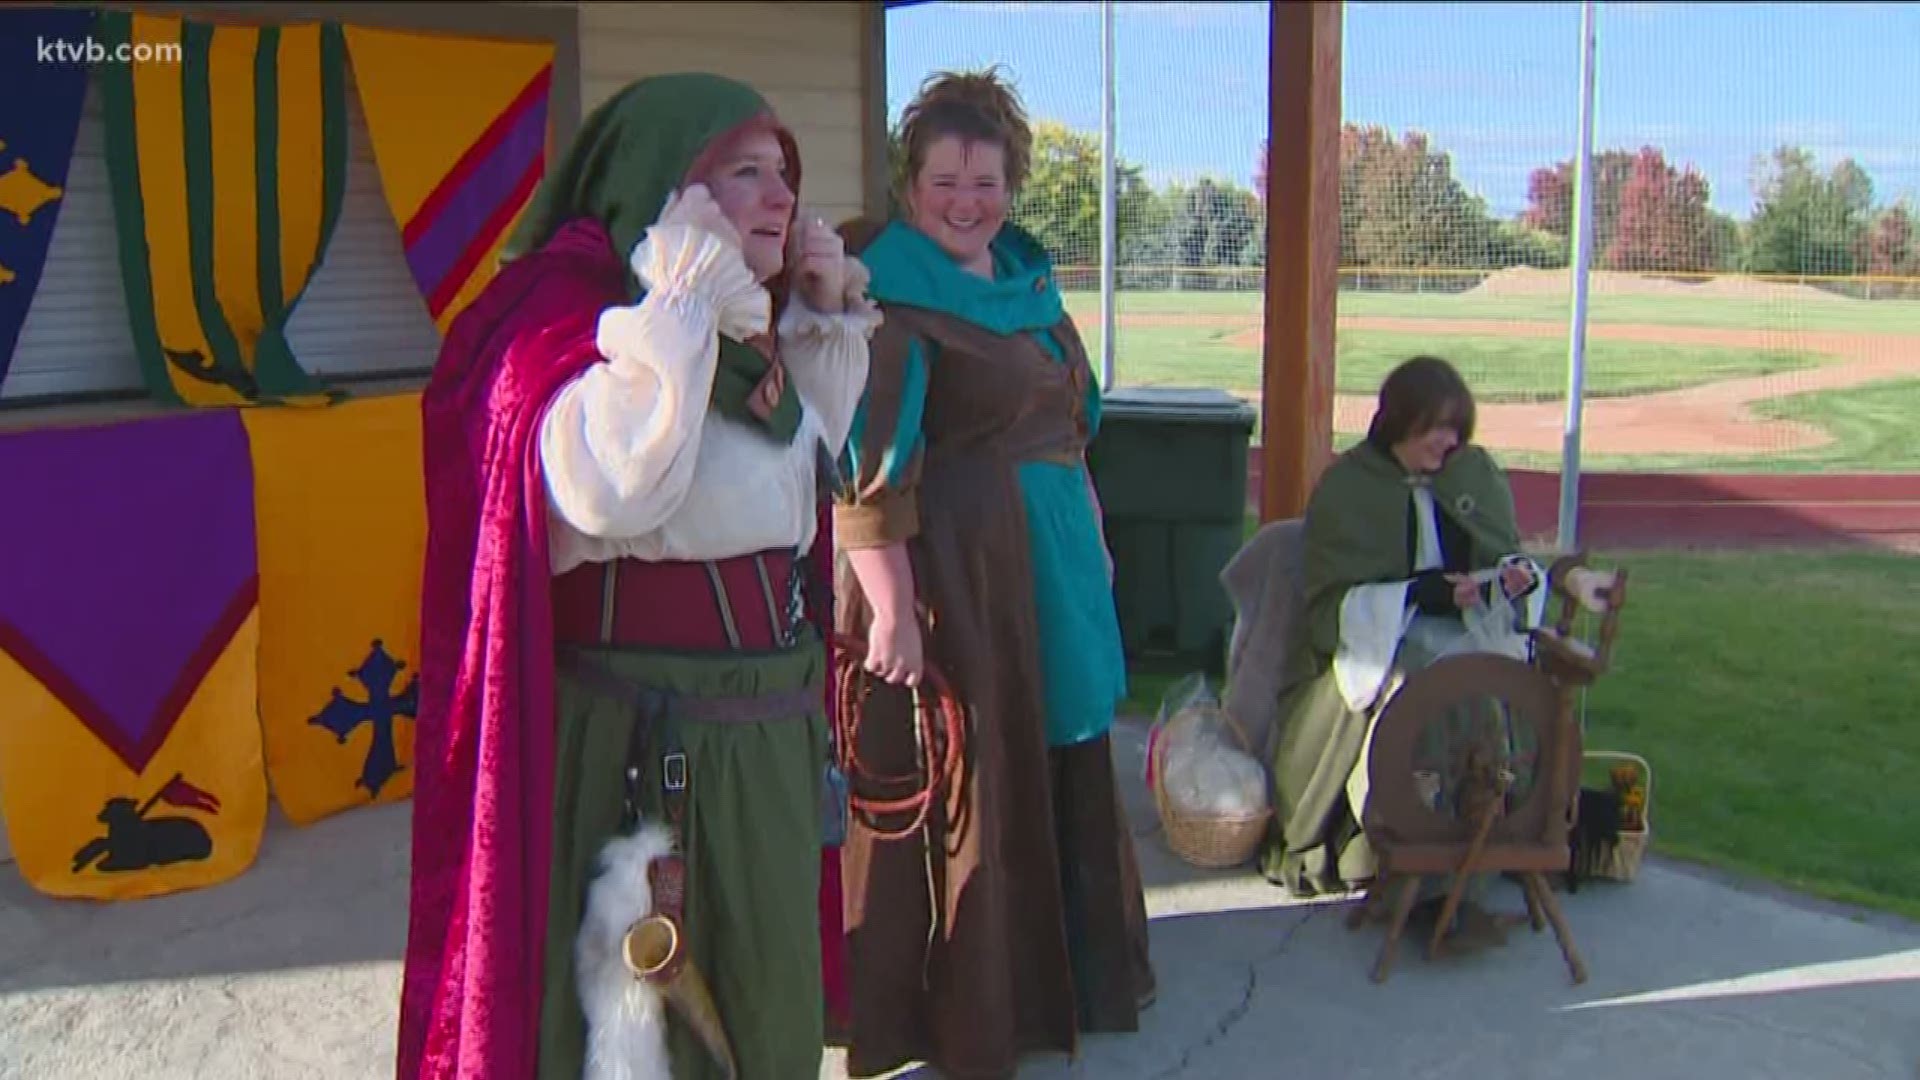 Return to the 15th century at the Renaissance Faire